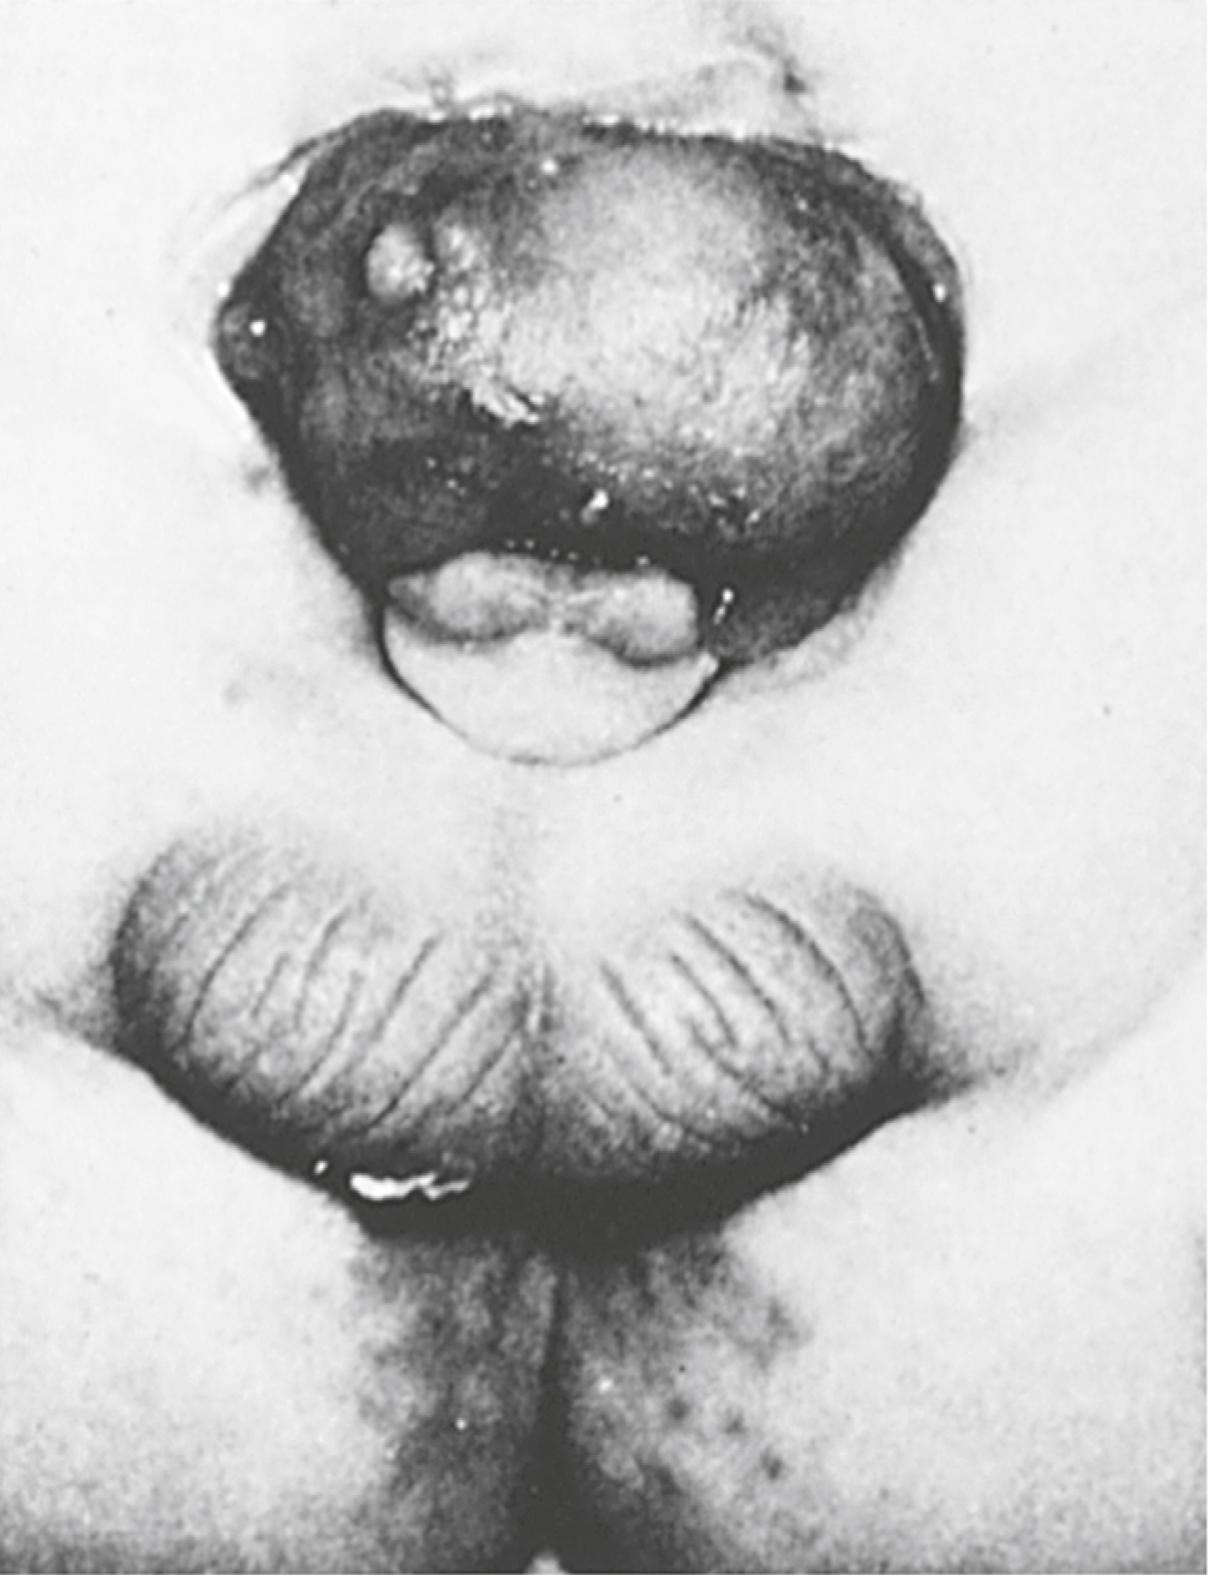 Fig. 16.22, Exstrophy of the bladder in a male infant, showing protrusion of the posterior wall of the bladder through a defect in the lower abdominal wall.